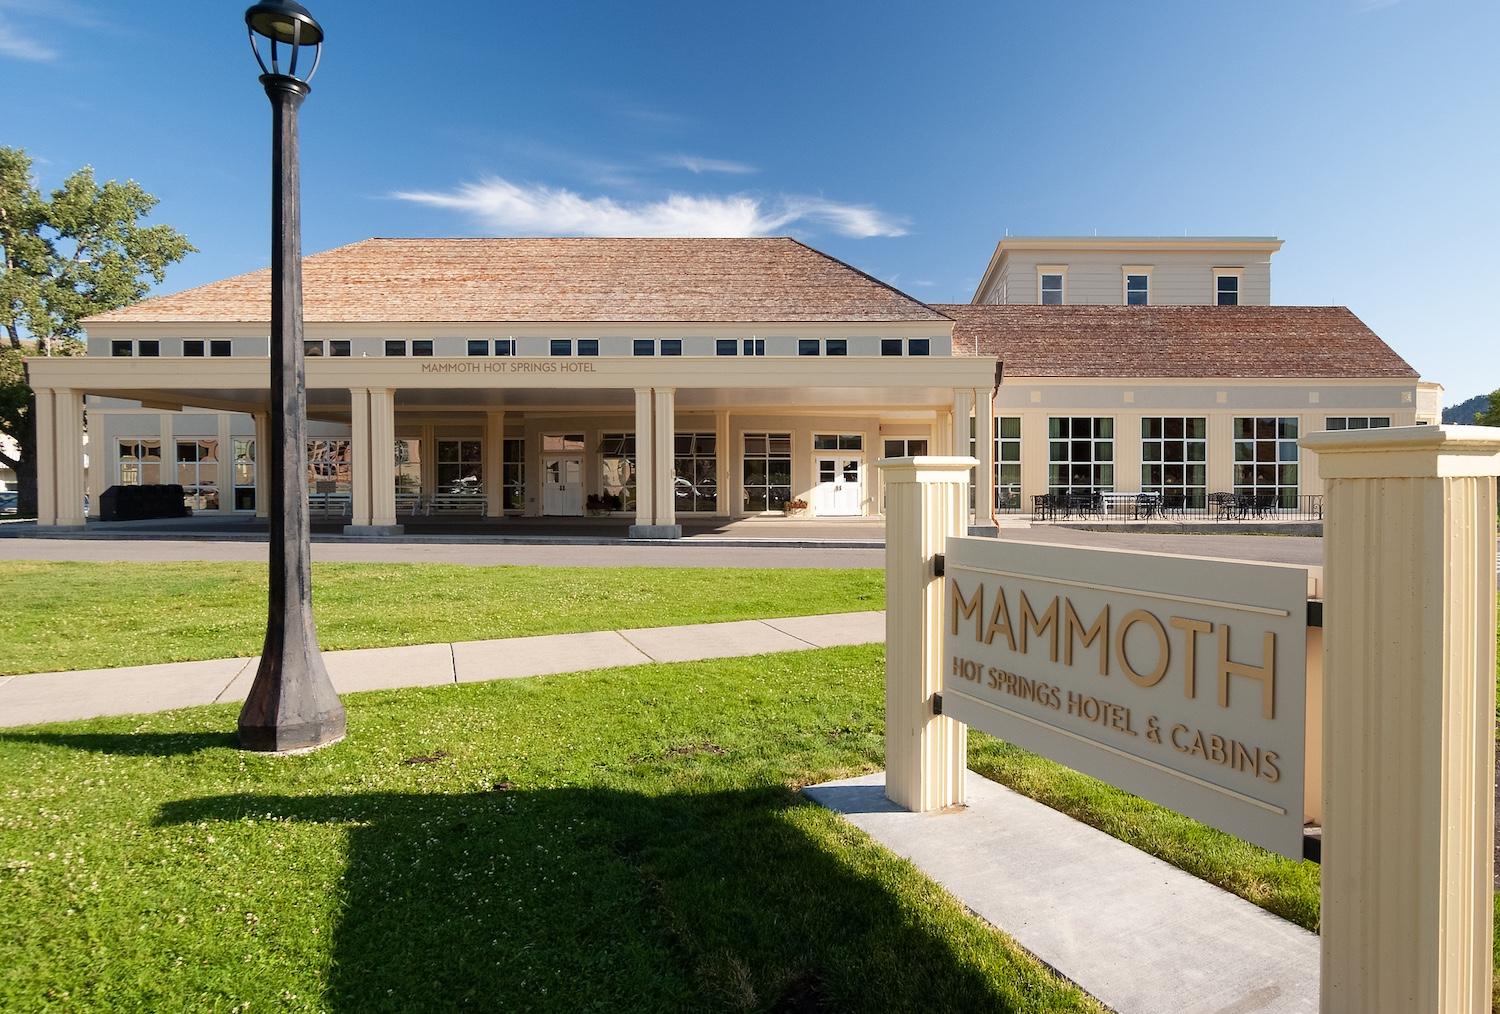 A four-year-long rehabilitation of the Mammoth Hotel in Yellowstone cost about $30 million, funded by the National Park Service/NPS file